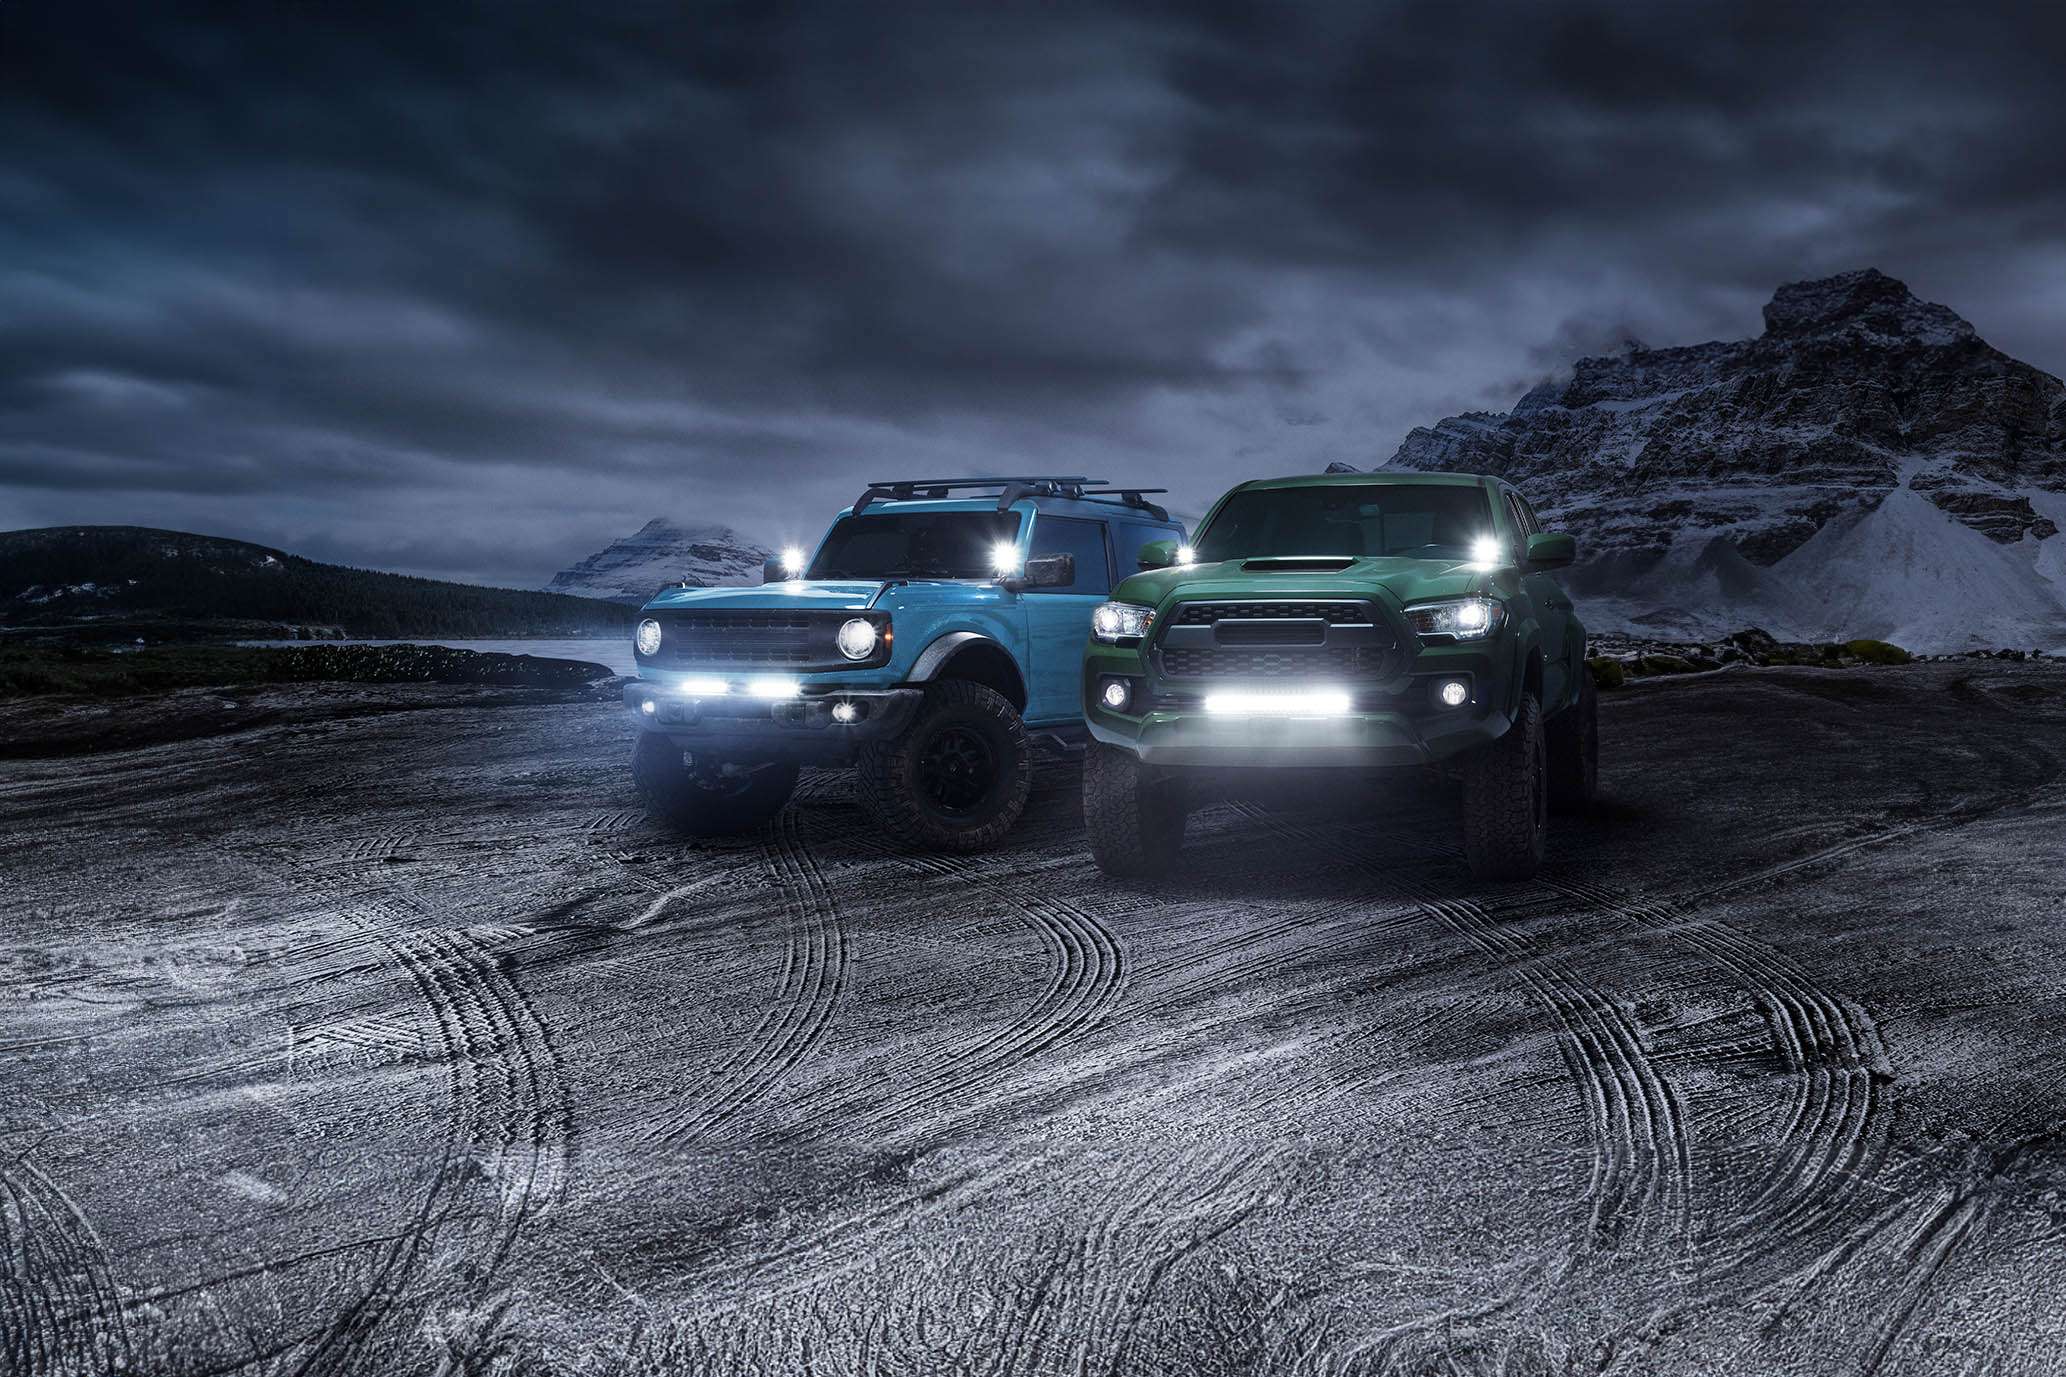 Sylvania the Leader in Off-road Lighting